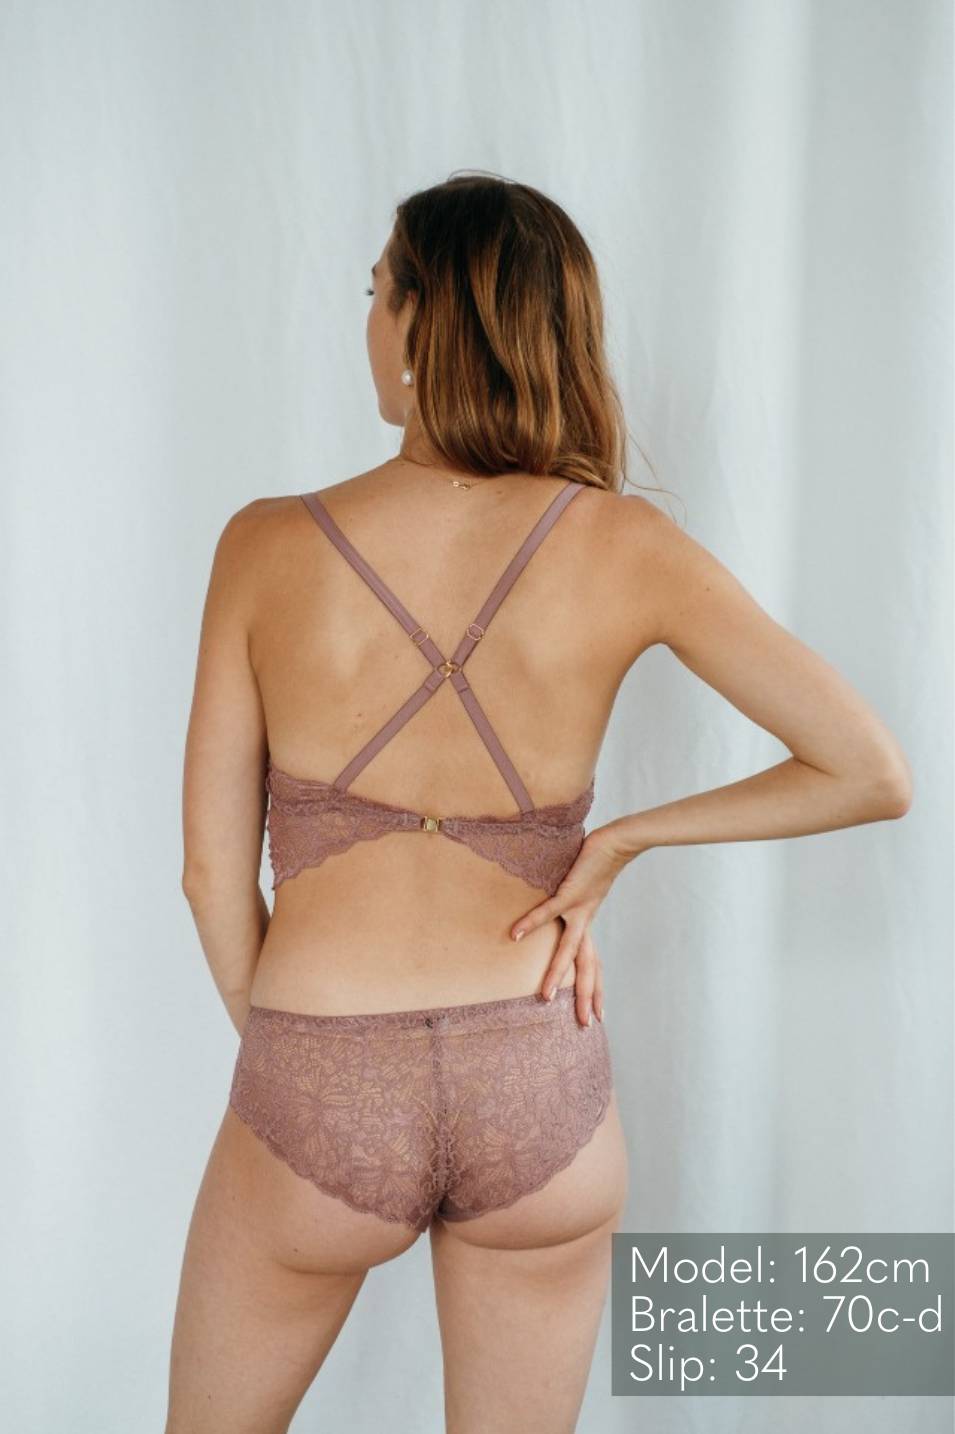 Model wears cheeky slip  in rose and matching Bralette, photographed from behind.